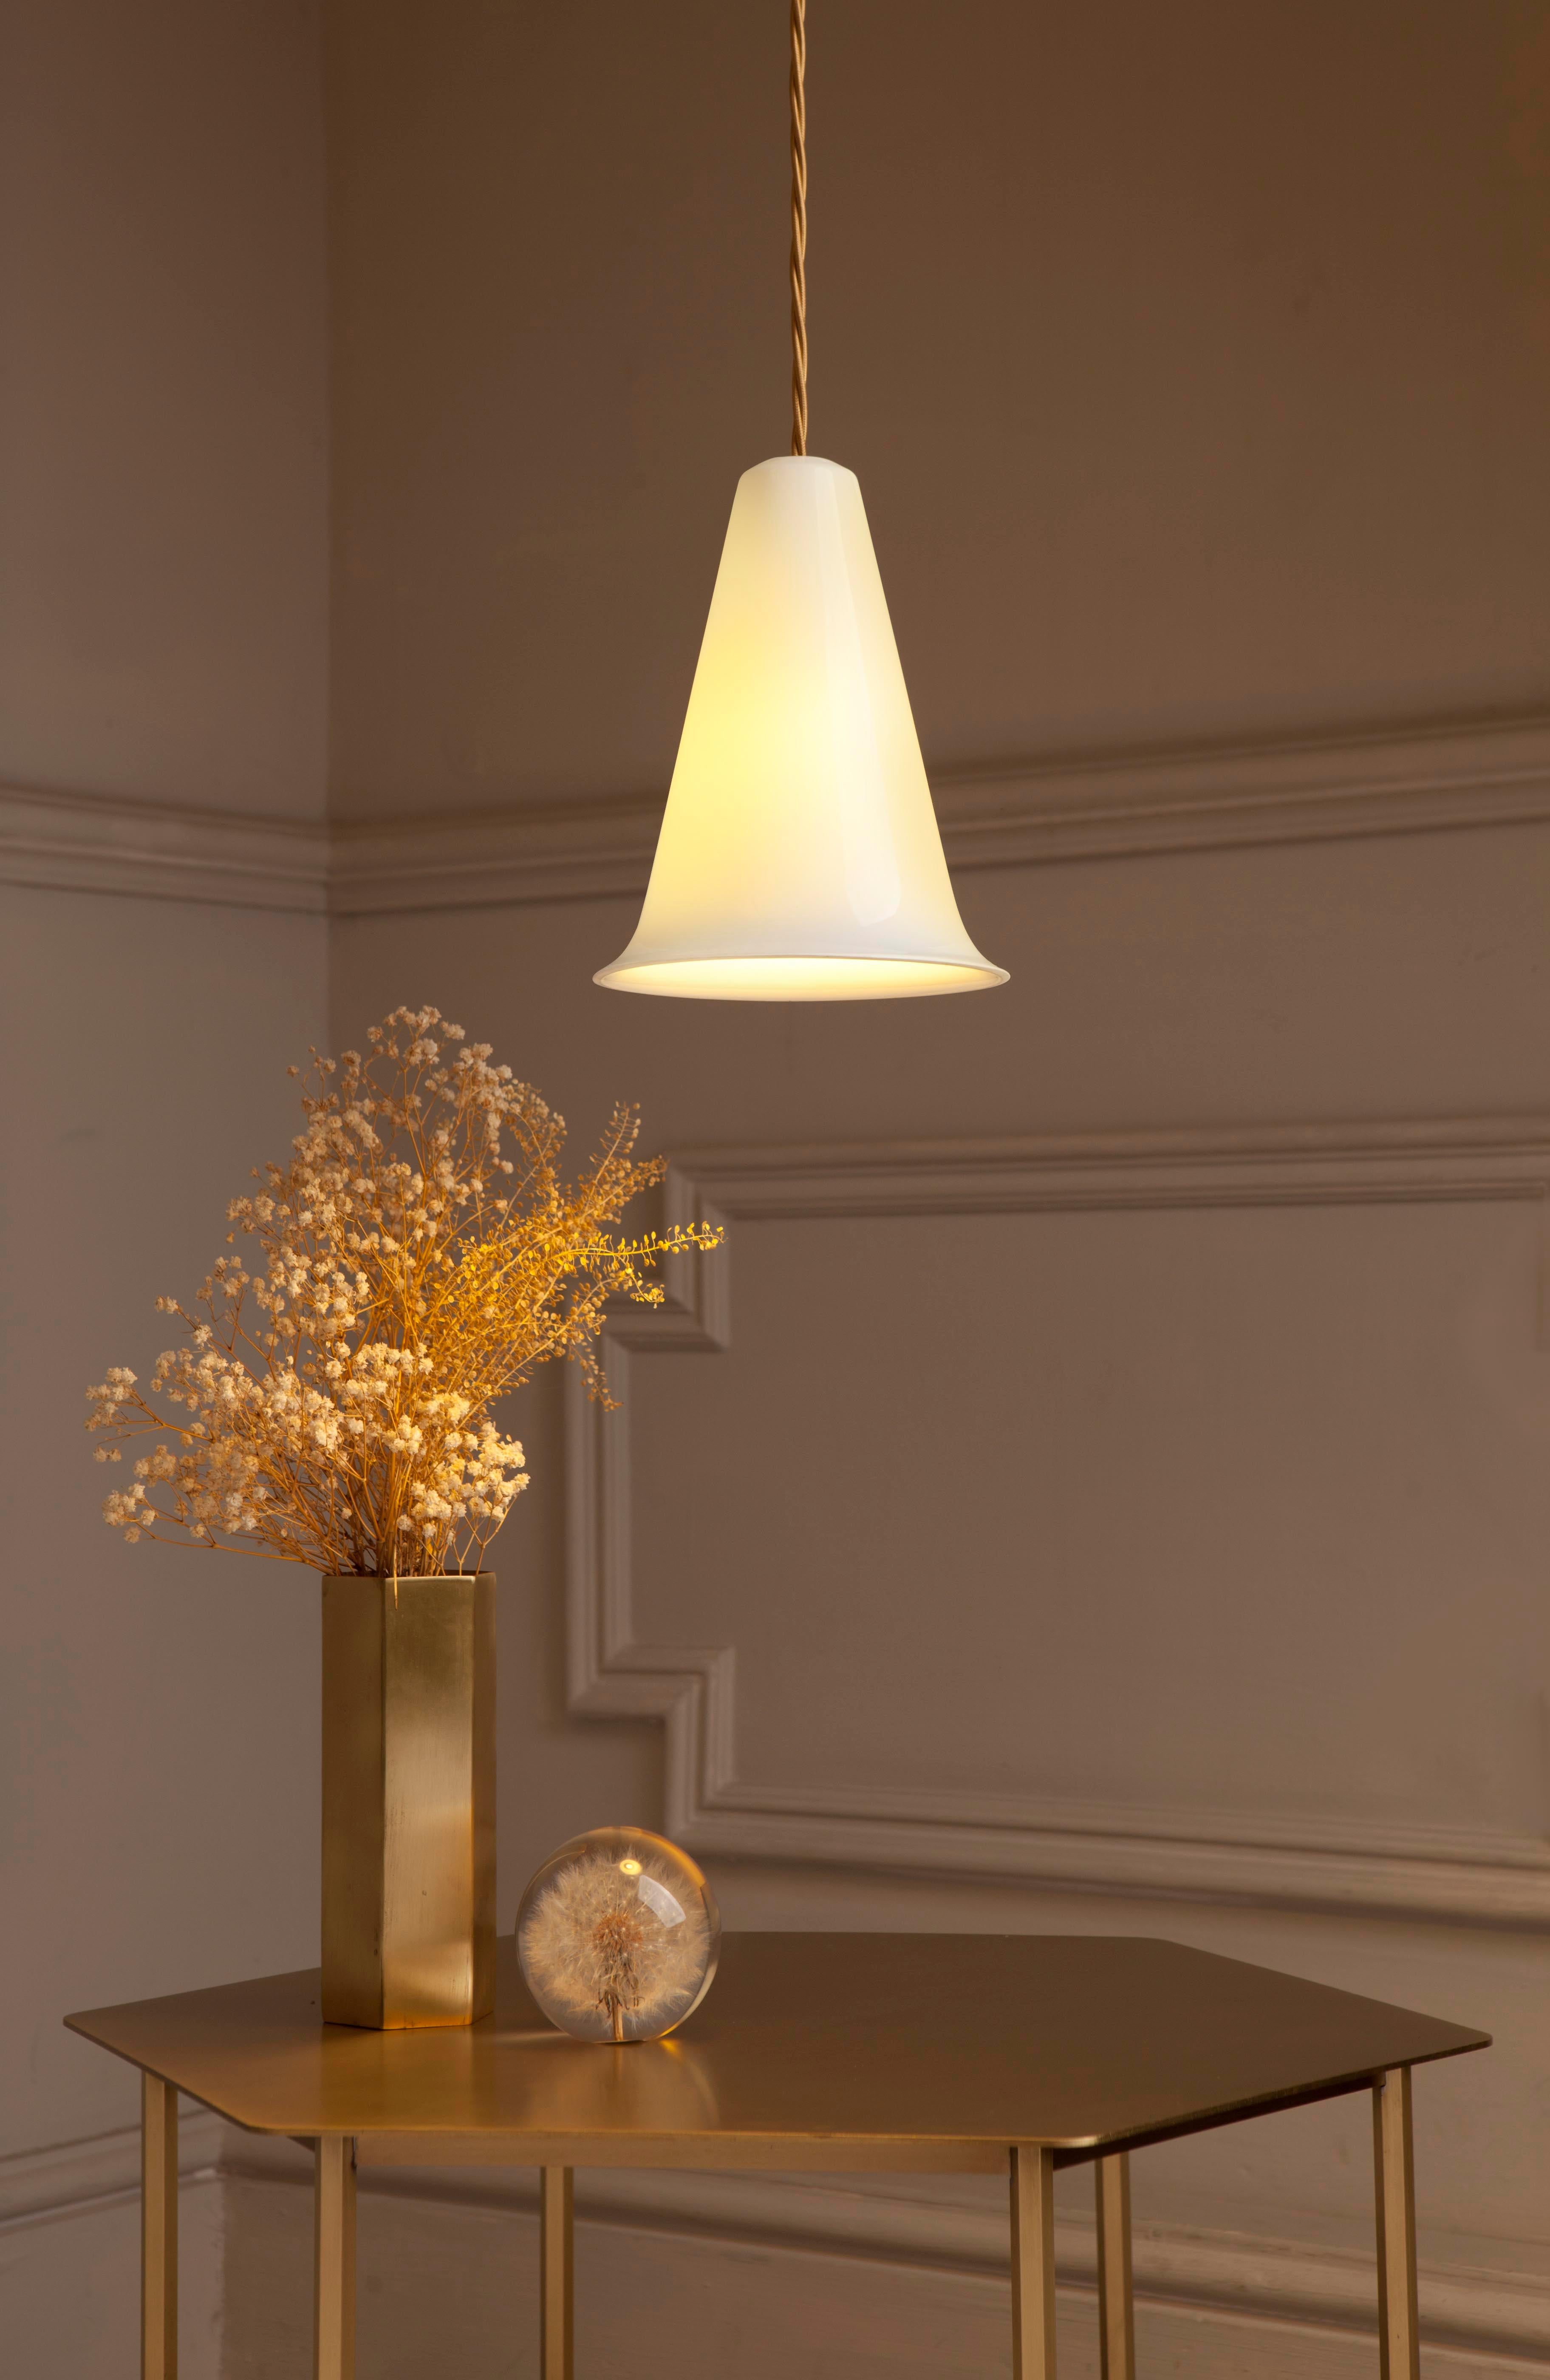 The bone china ceramic lampshades feature a simple and soft silhouette, their slightly translucent materiality reveal a warm light. The pendants are slip cast, fired and coated in a clear glaze. They feature golden twisted three core cords and brass